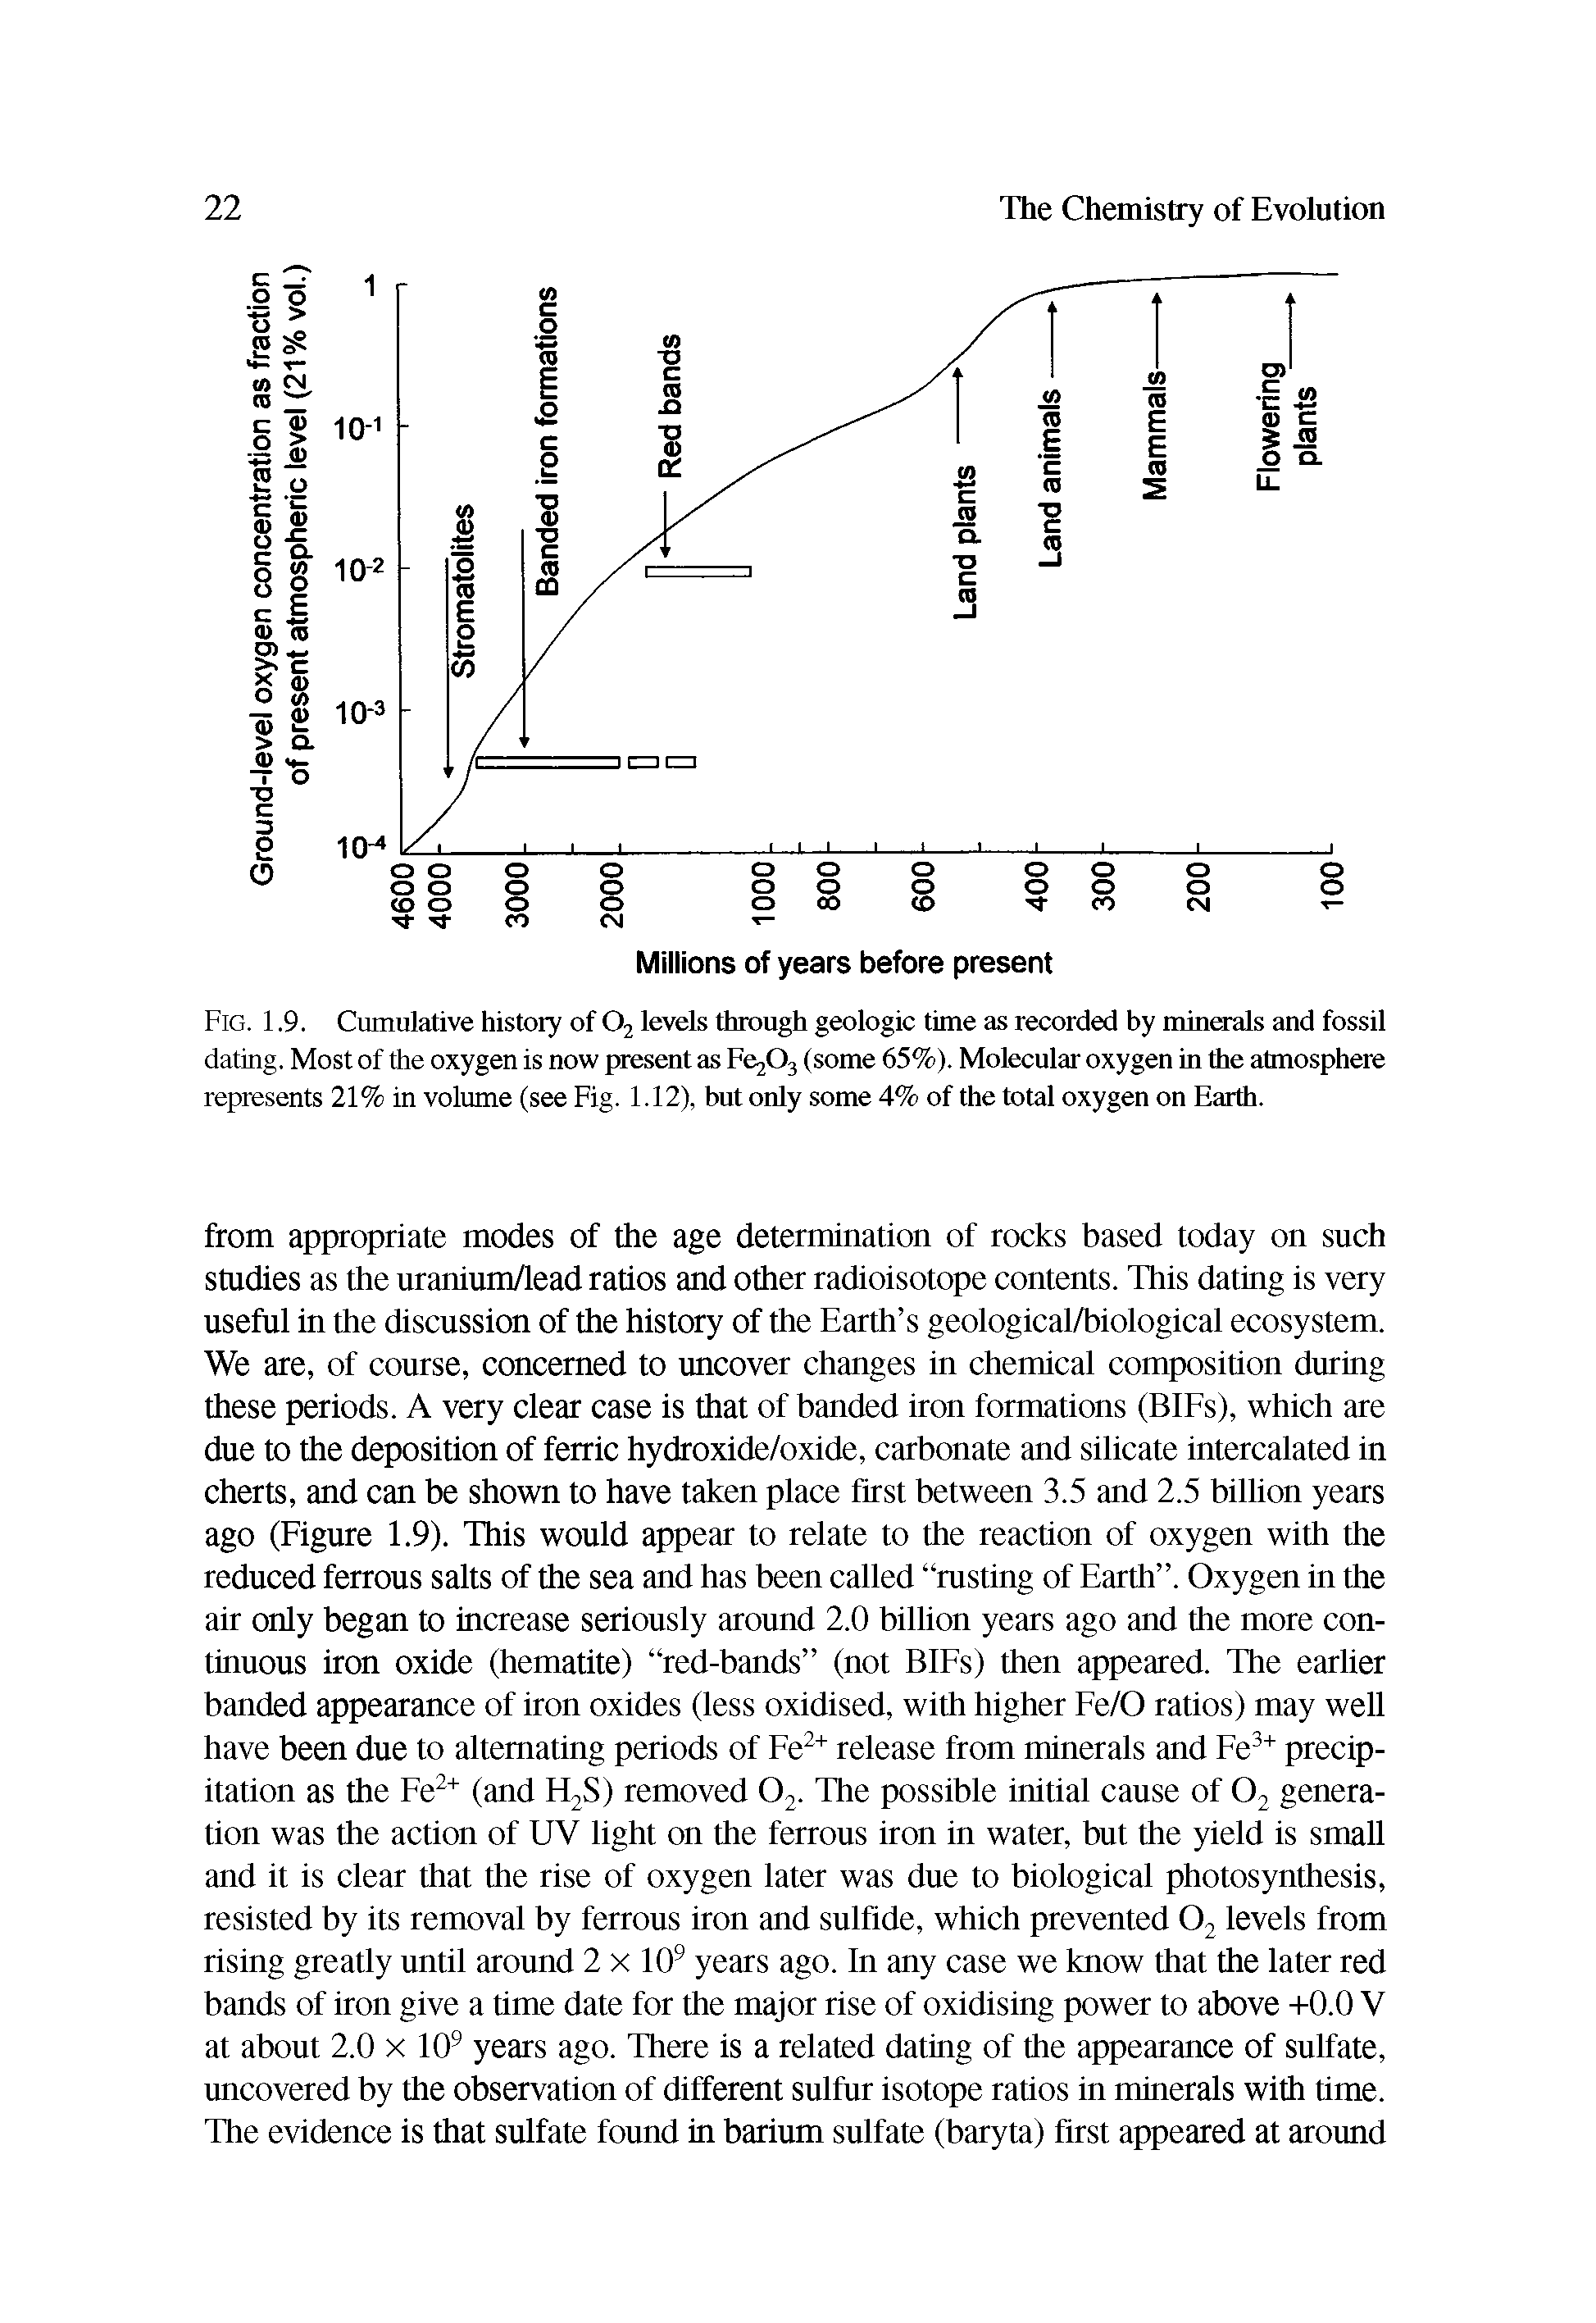 Fig. 1.9. Cumulative history of 02 levels through geologic time as recorded by minerals and fossil dating. Most of the oxygen is now present as Fe203 (some 65%). Molecular oxygen in the atmosphere represents 21% in volume (see Fig. 1.12), but only some 4% of the total oxygen on Earth.